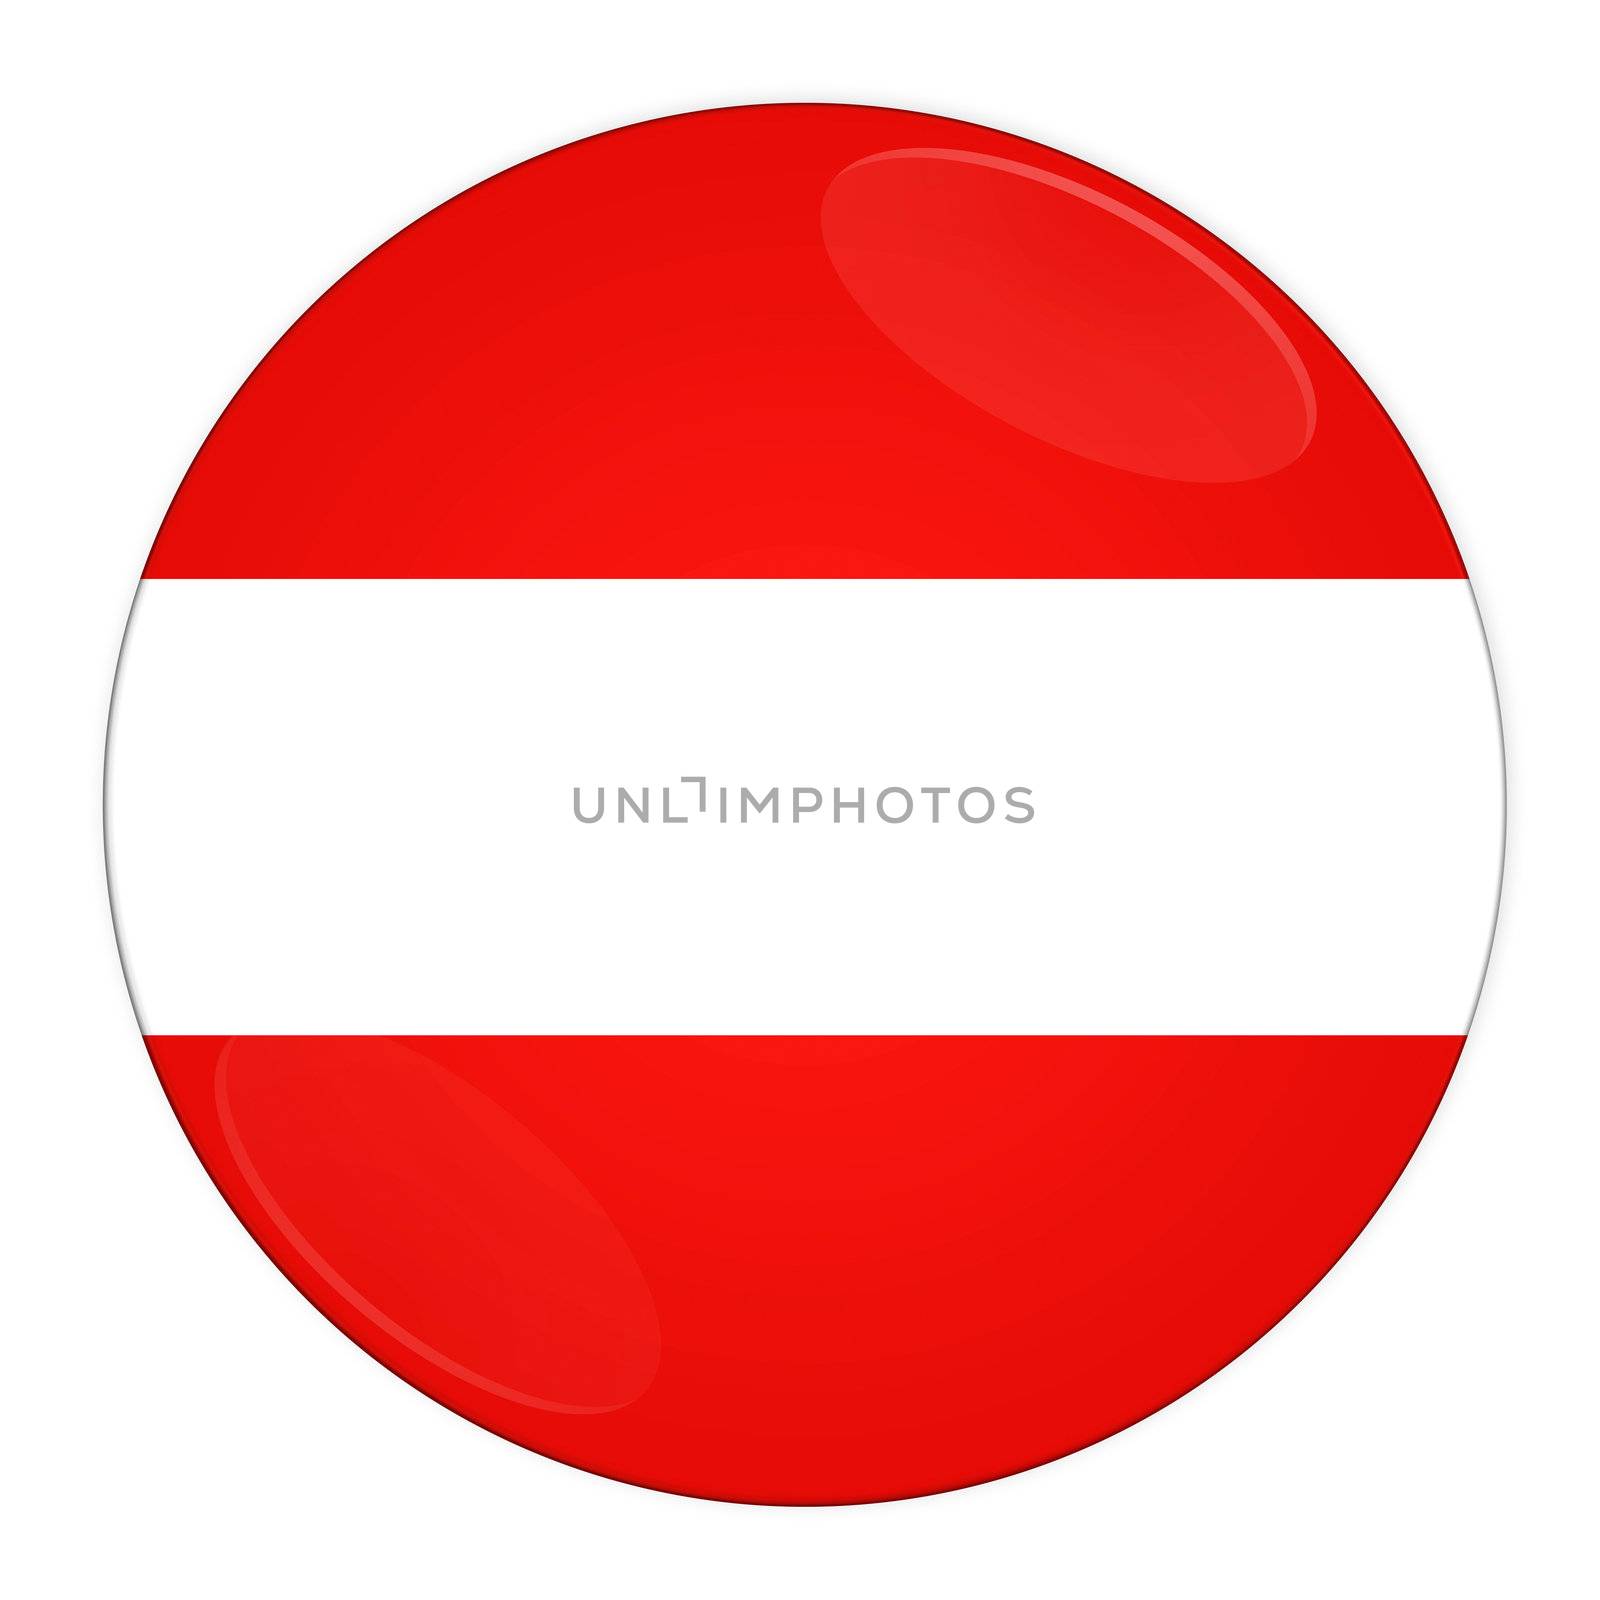 Abstract illustration: button with flag from austria country